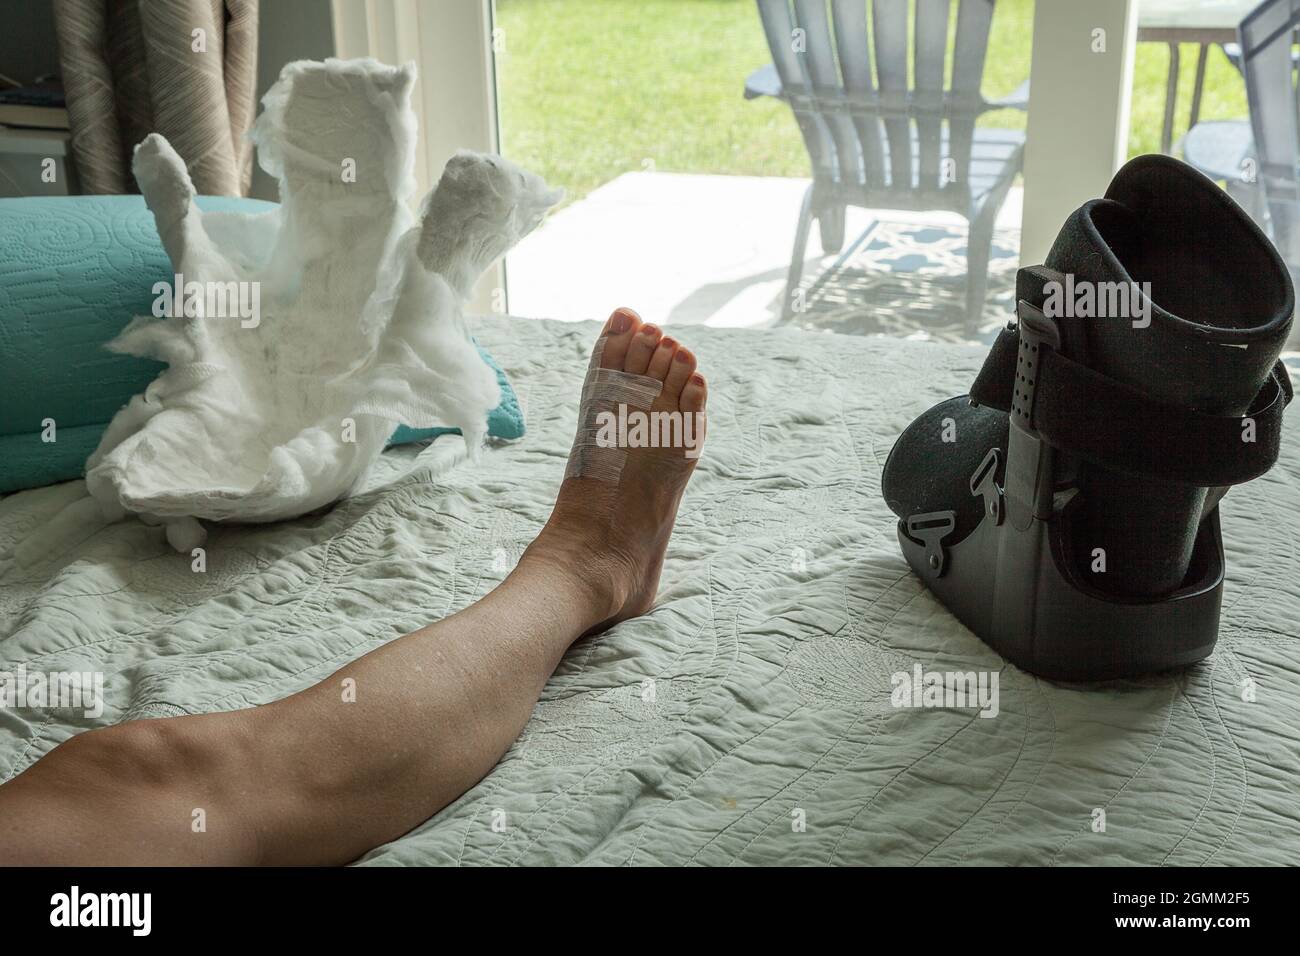 Cast removed from a foot after bunion surgery as the leg is elevated and  resting Stock Photo - Alamy